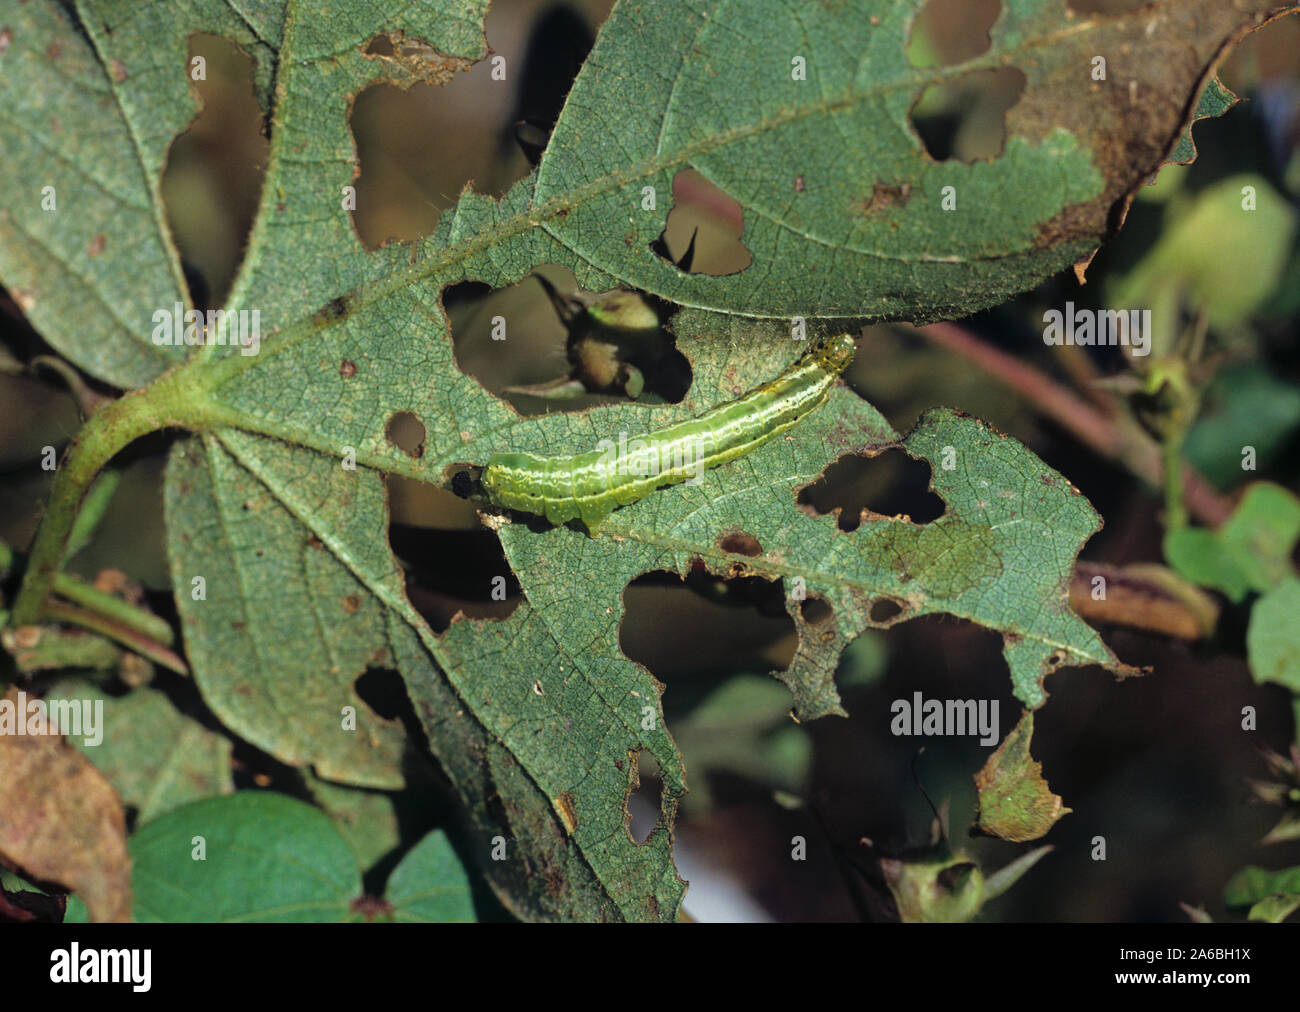 Cabbage looper (Trichoplusia ni) green, white striped caterpillar on damaged cotton leaf, Mississipi, USA, October Stock Photo